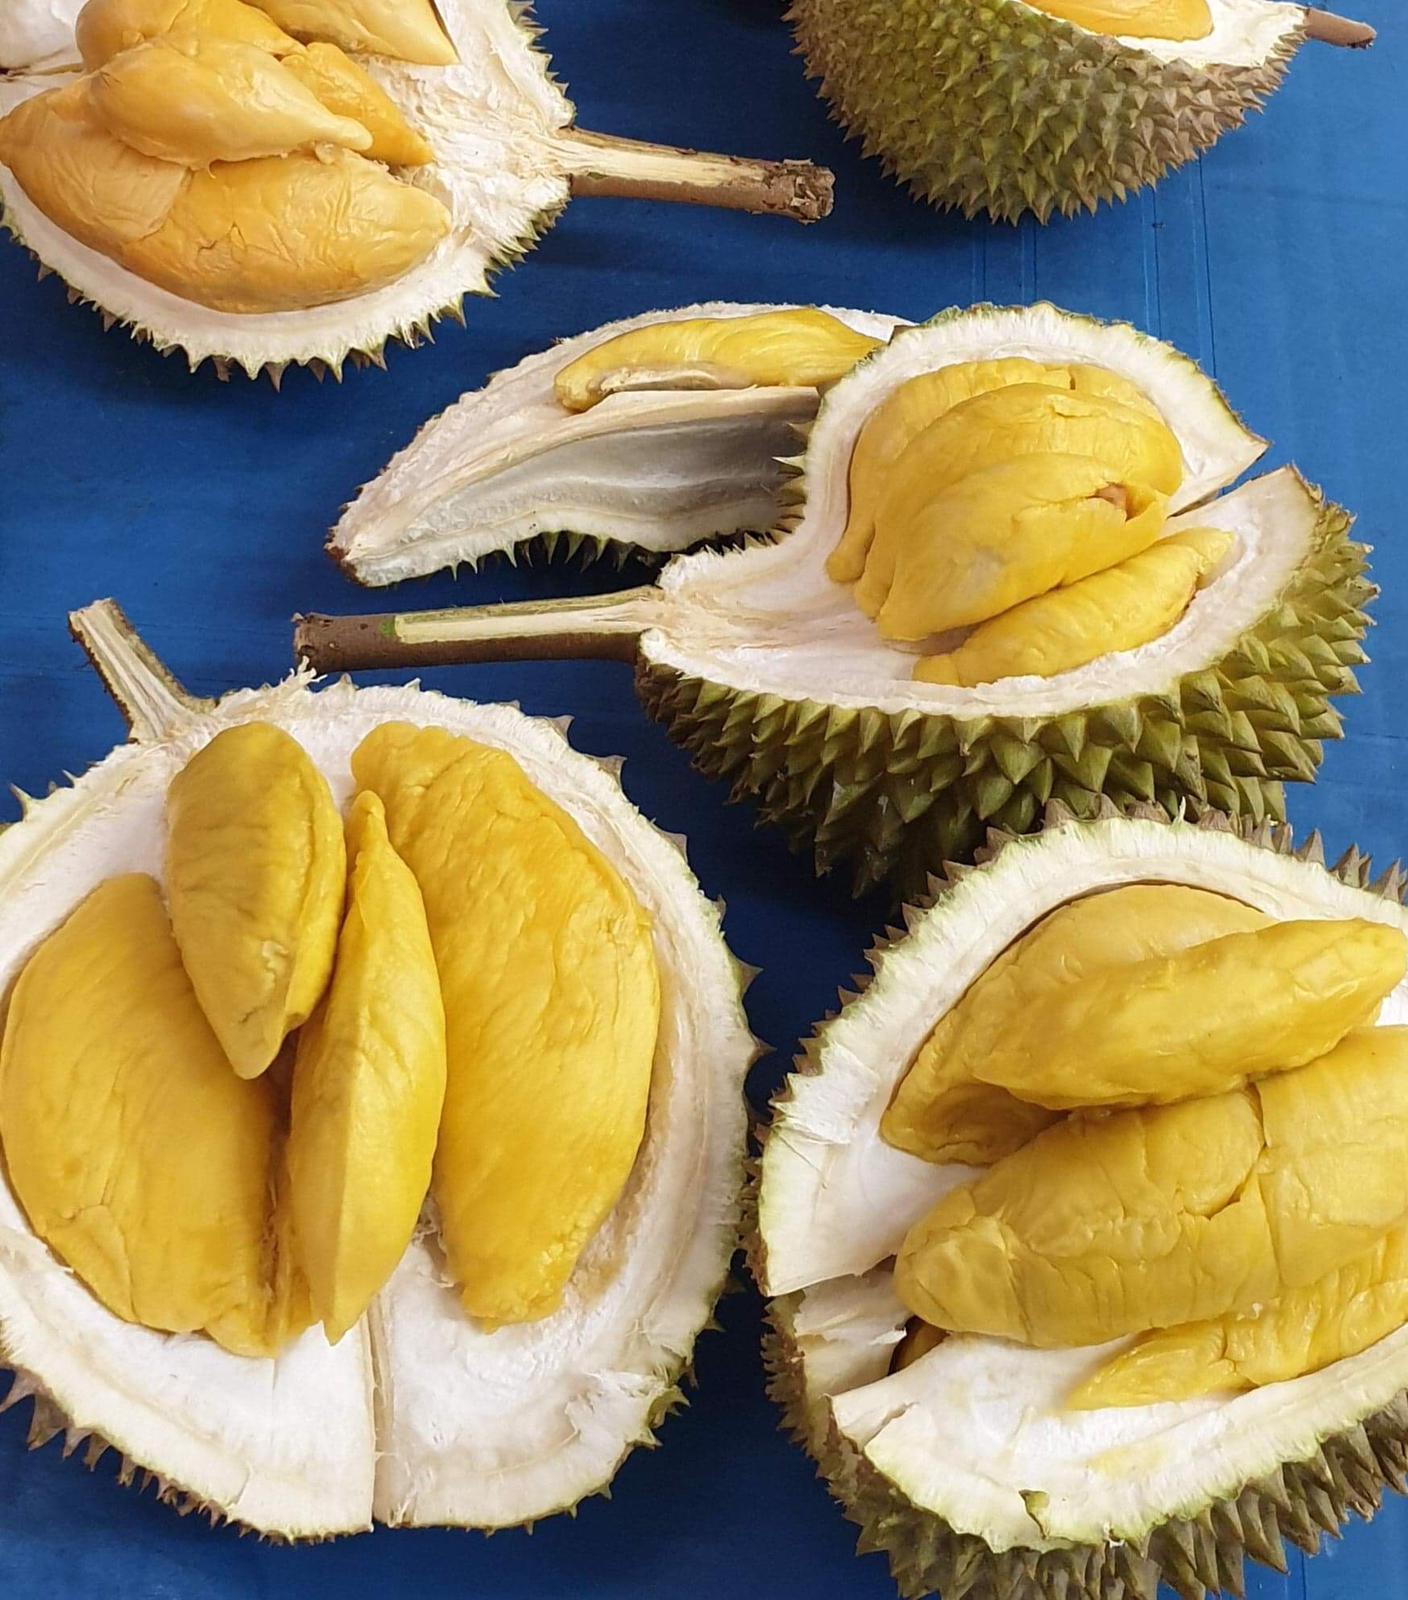 durian pricing and types | Durian Express Delivery